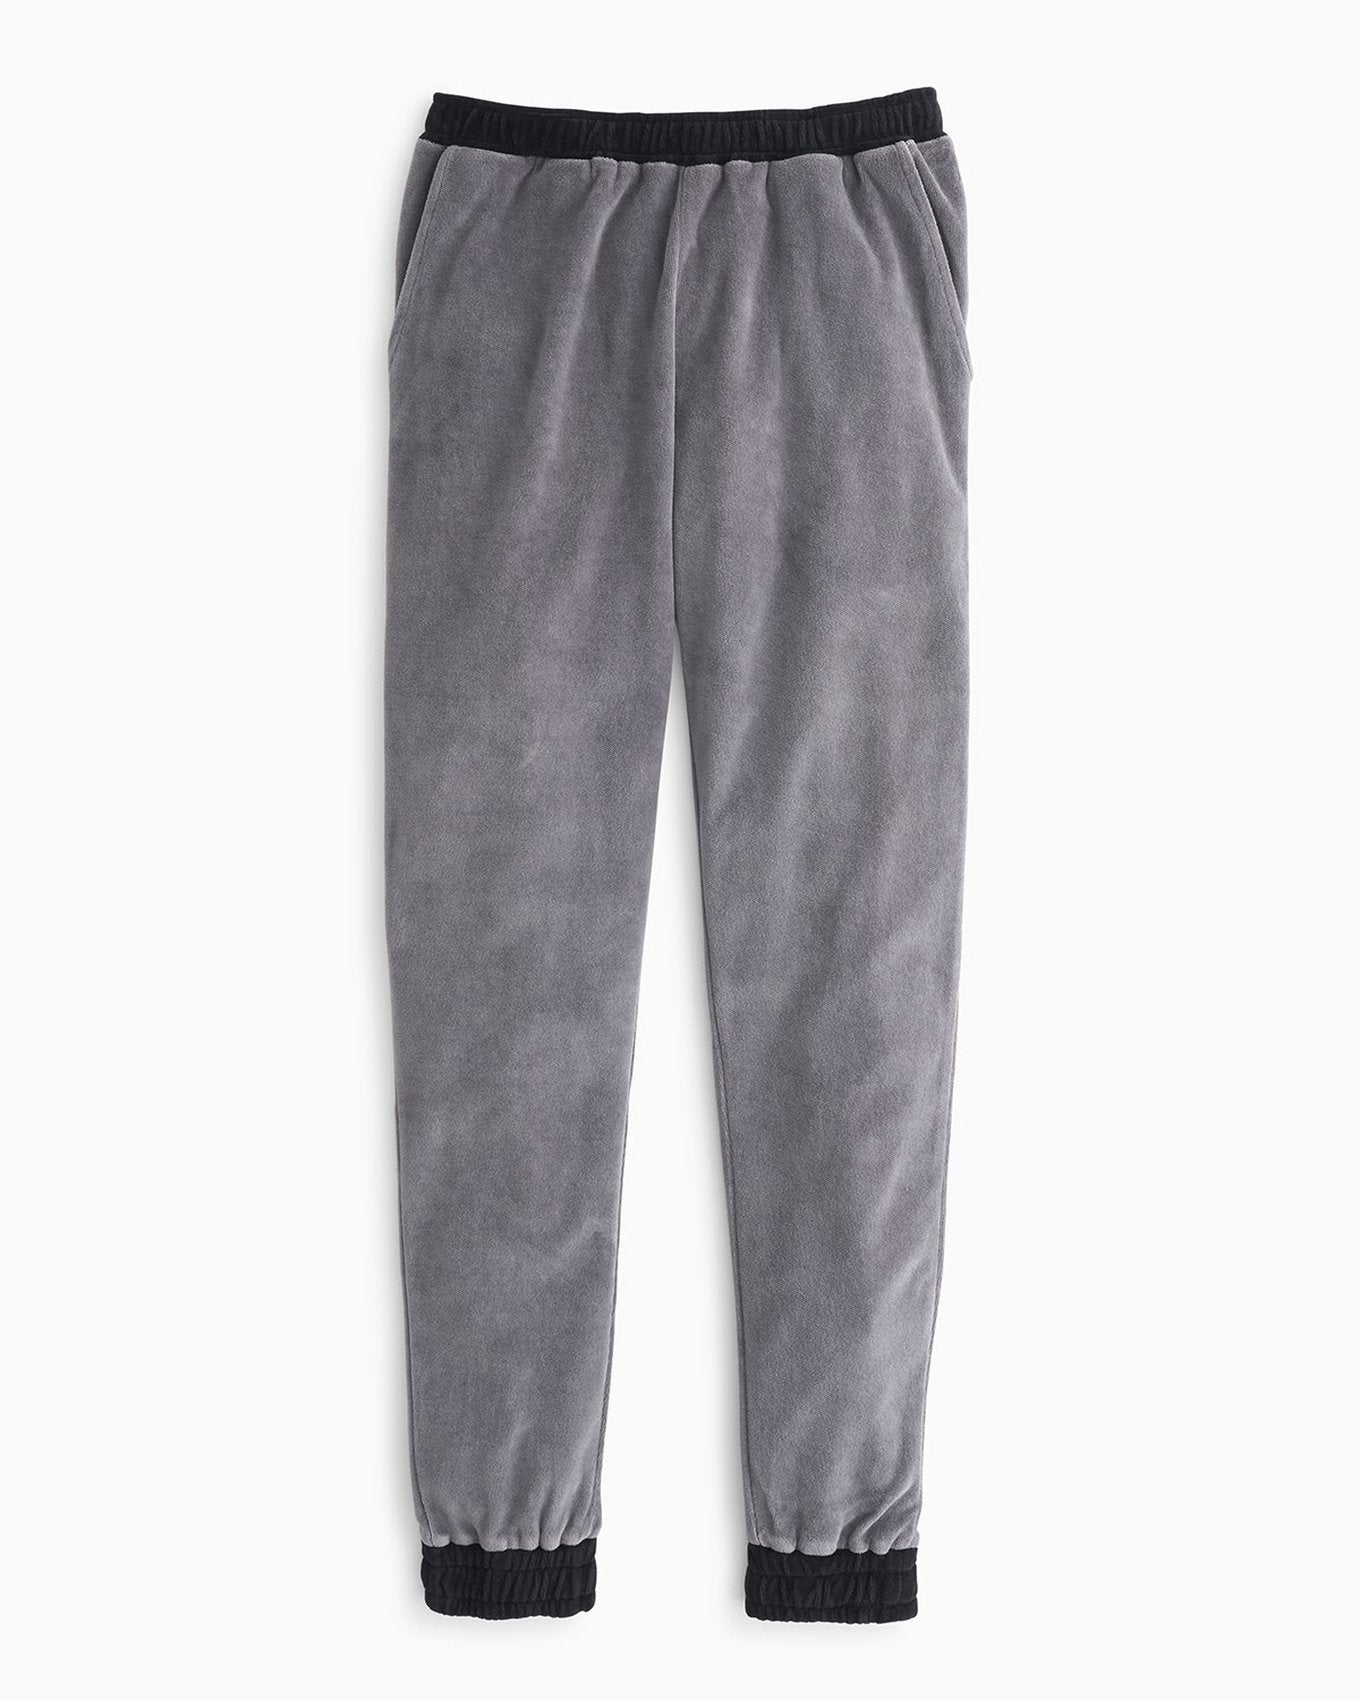 YesAnd Organic Velour Jogger Jogger in color Alloy and shape jogger/sweatpant